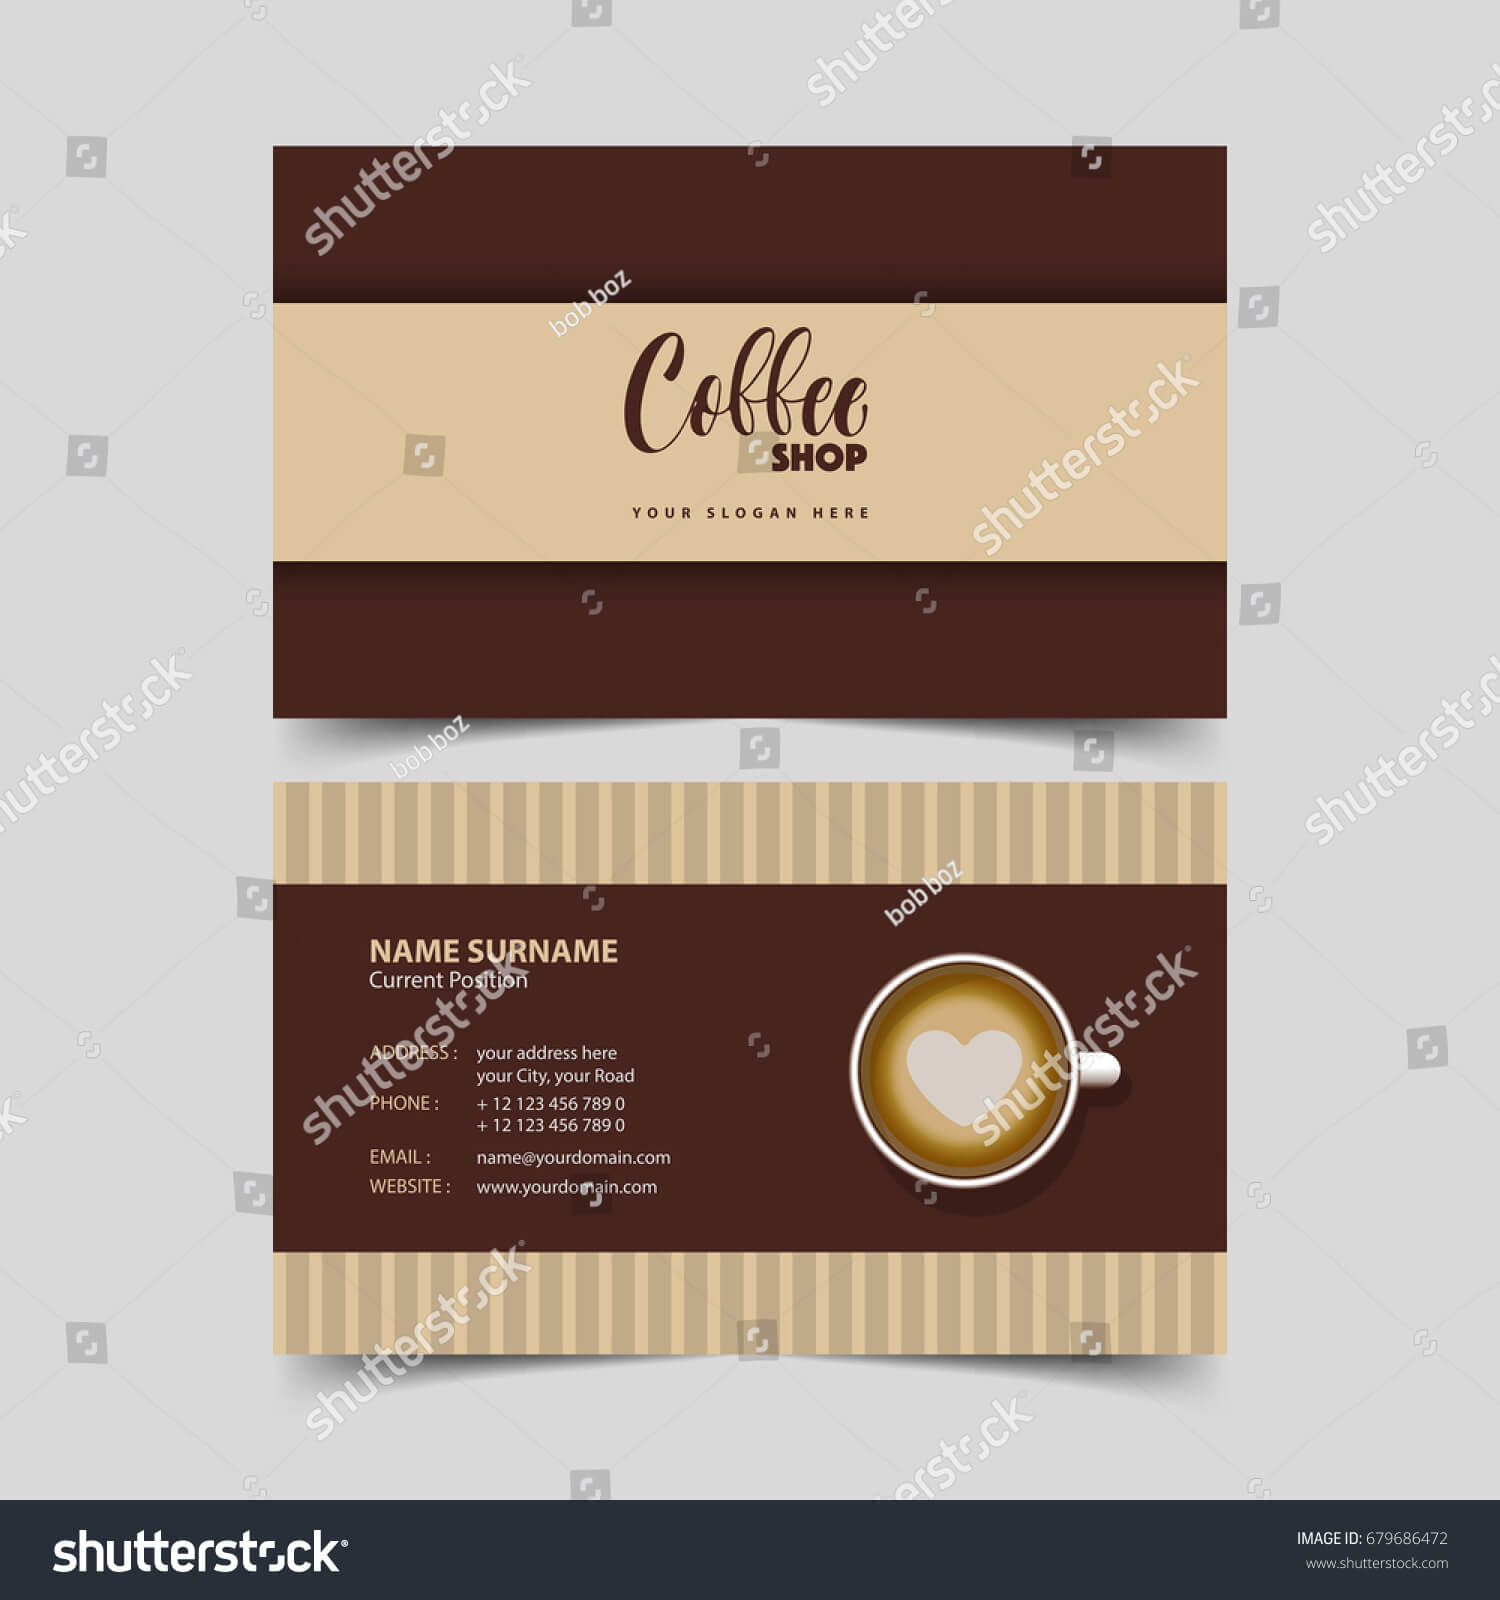 Coffee Shop Business Card Design Template Stock Vector Pertaining To Coffee Business Card Template Free